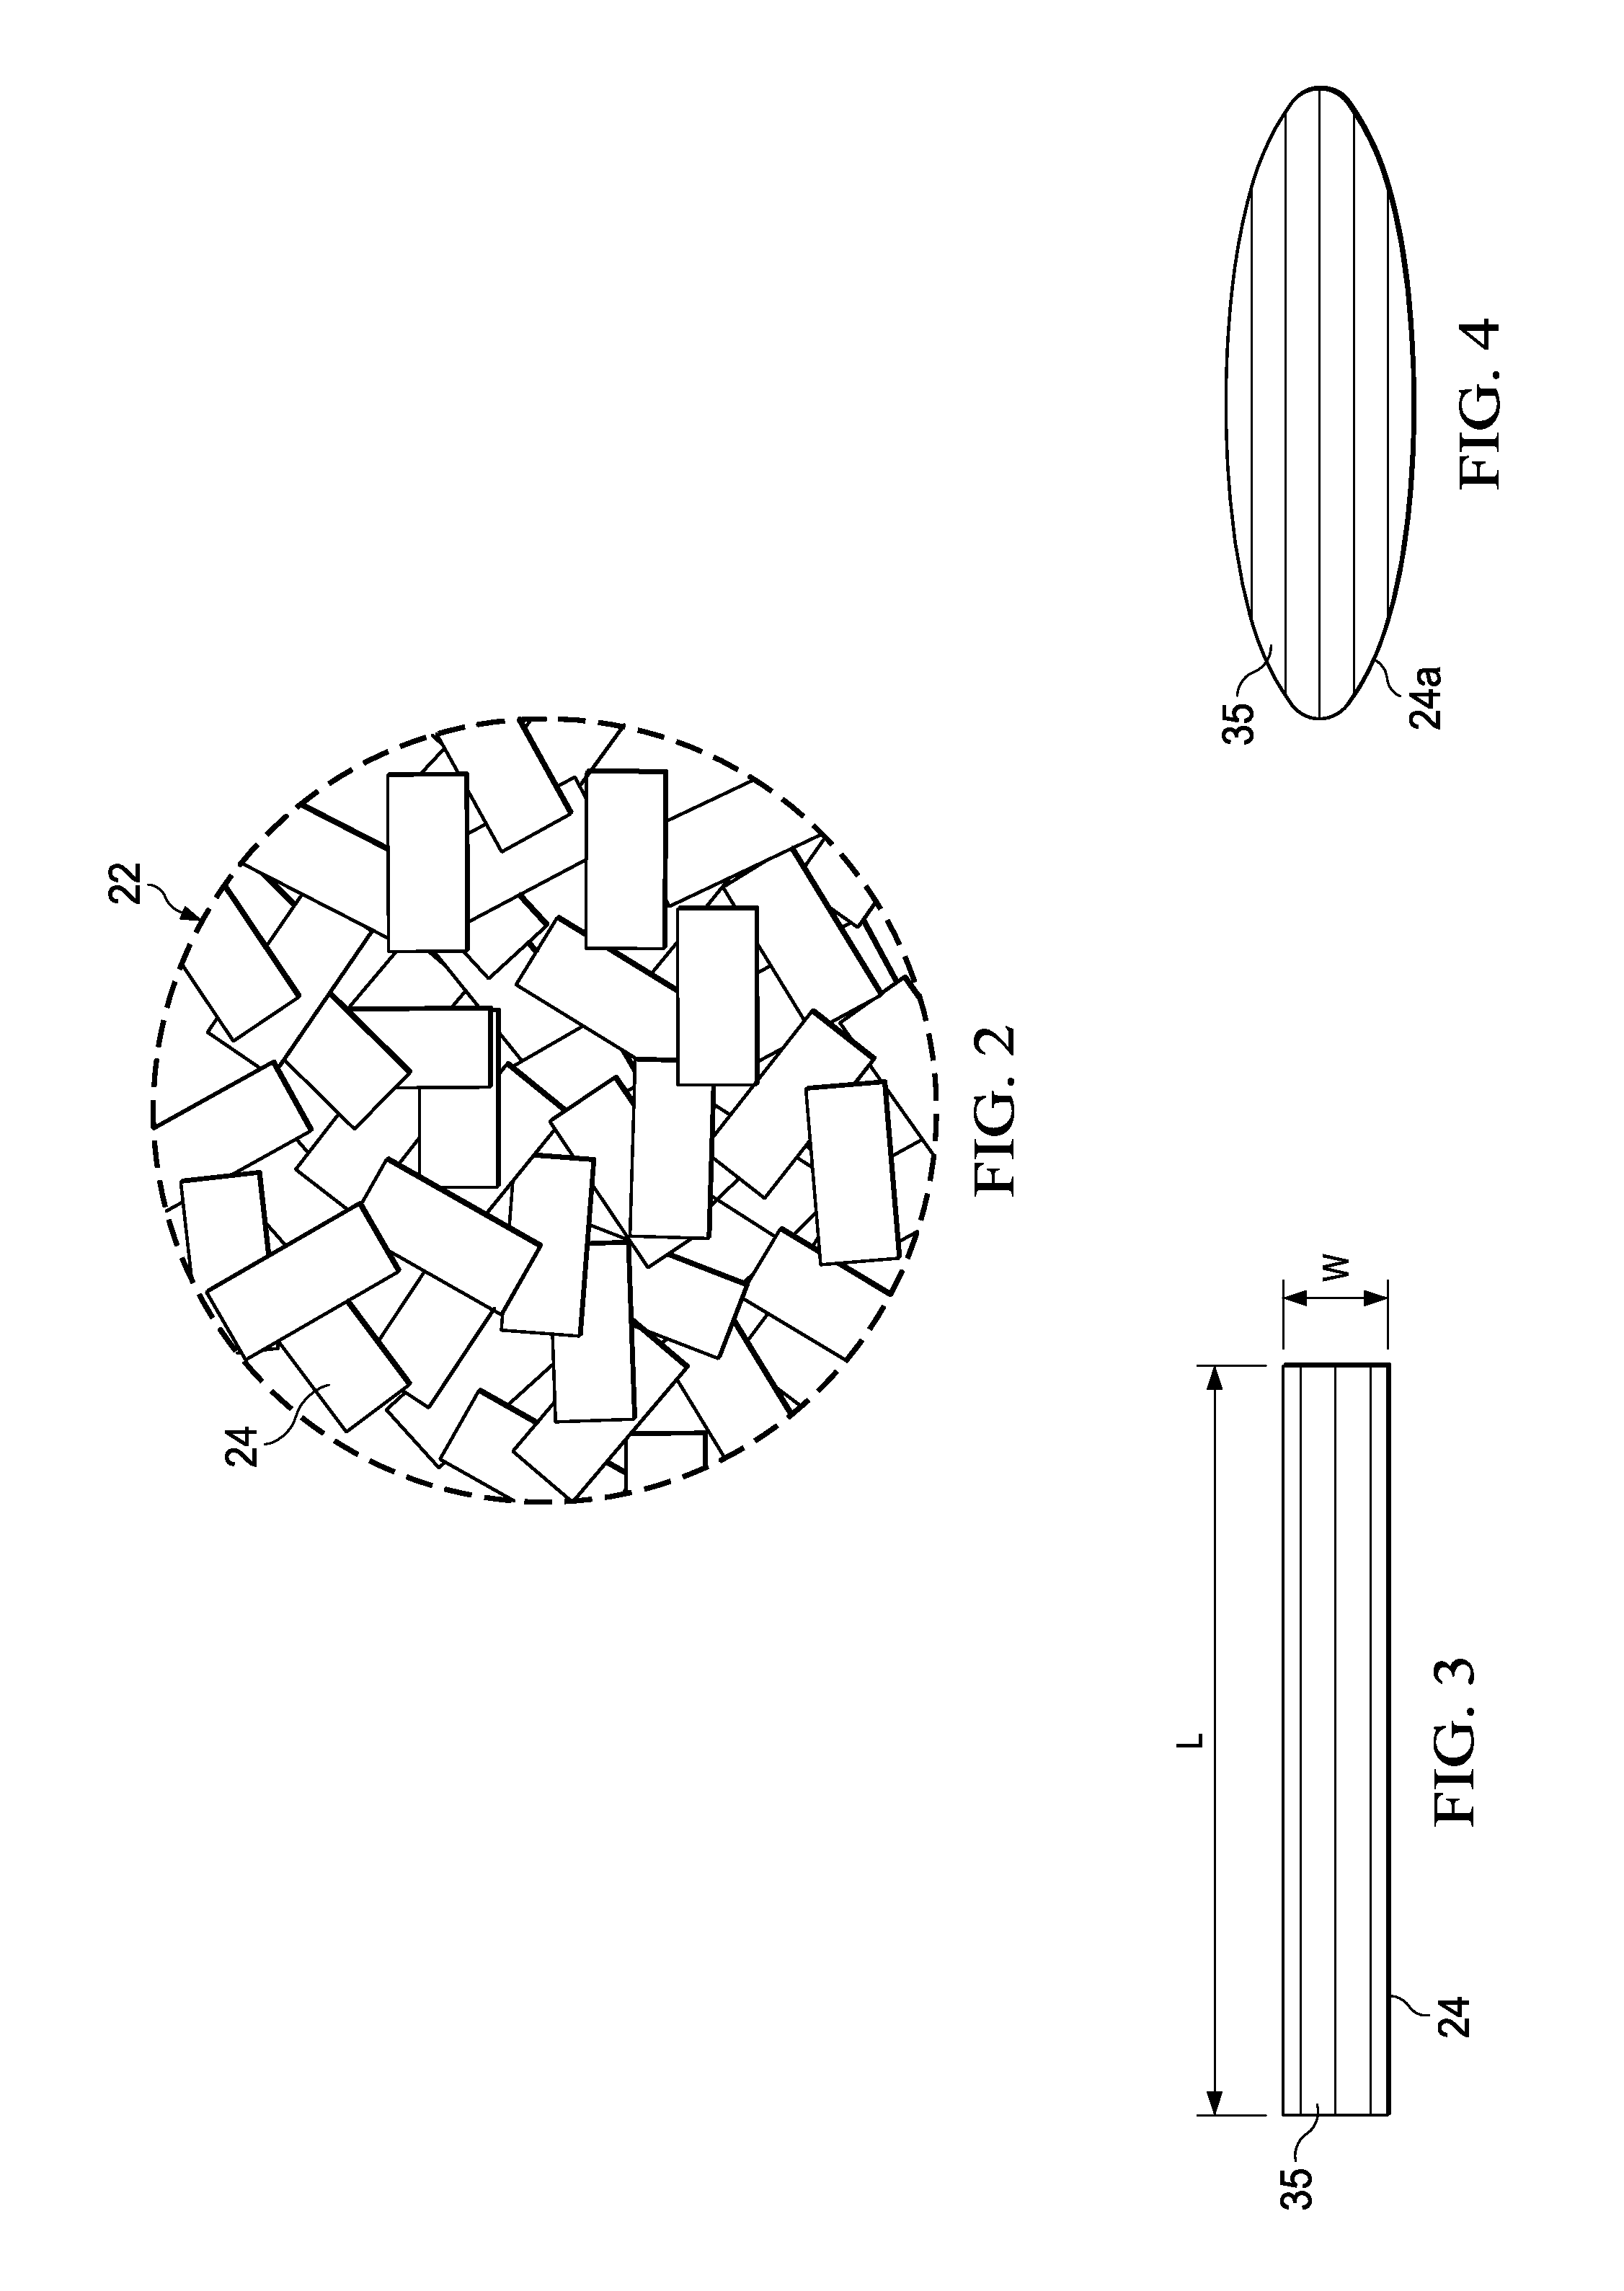 Method and apparatus for compression molding fiber reinforced thermoplastic parts